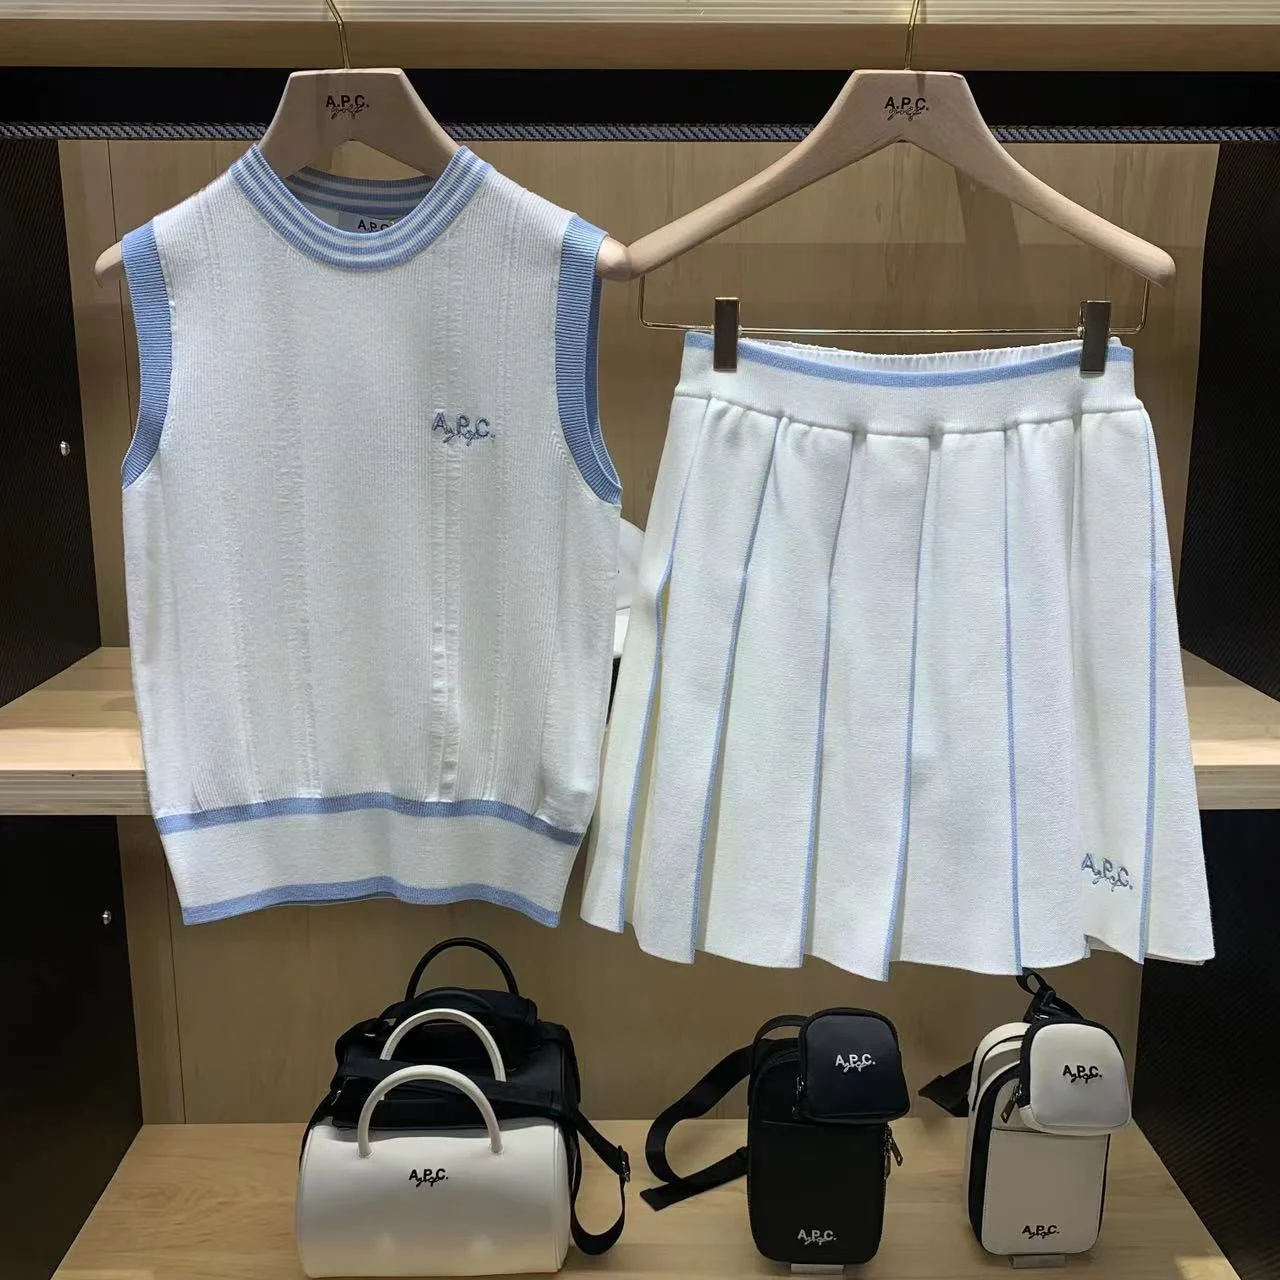 

APC Gentle and Cute Golf Apparel Women's Knitted Set Top Sleeveless Simple and Elegant Sports Golf Skirt